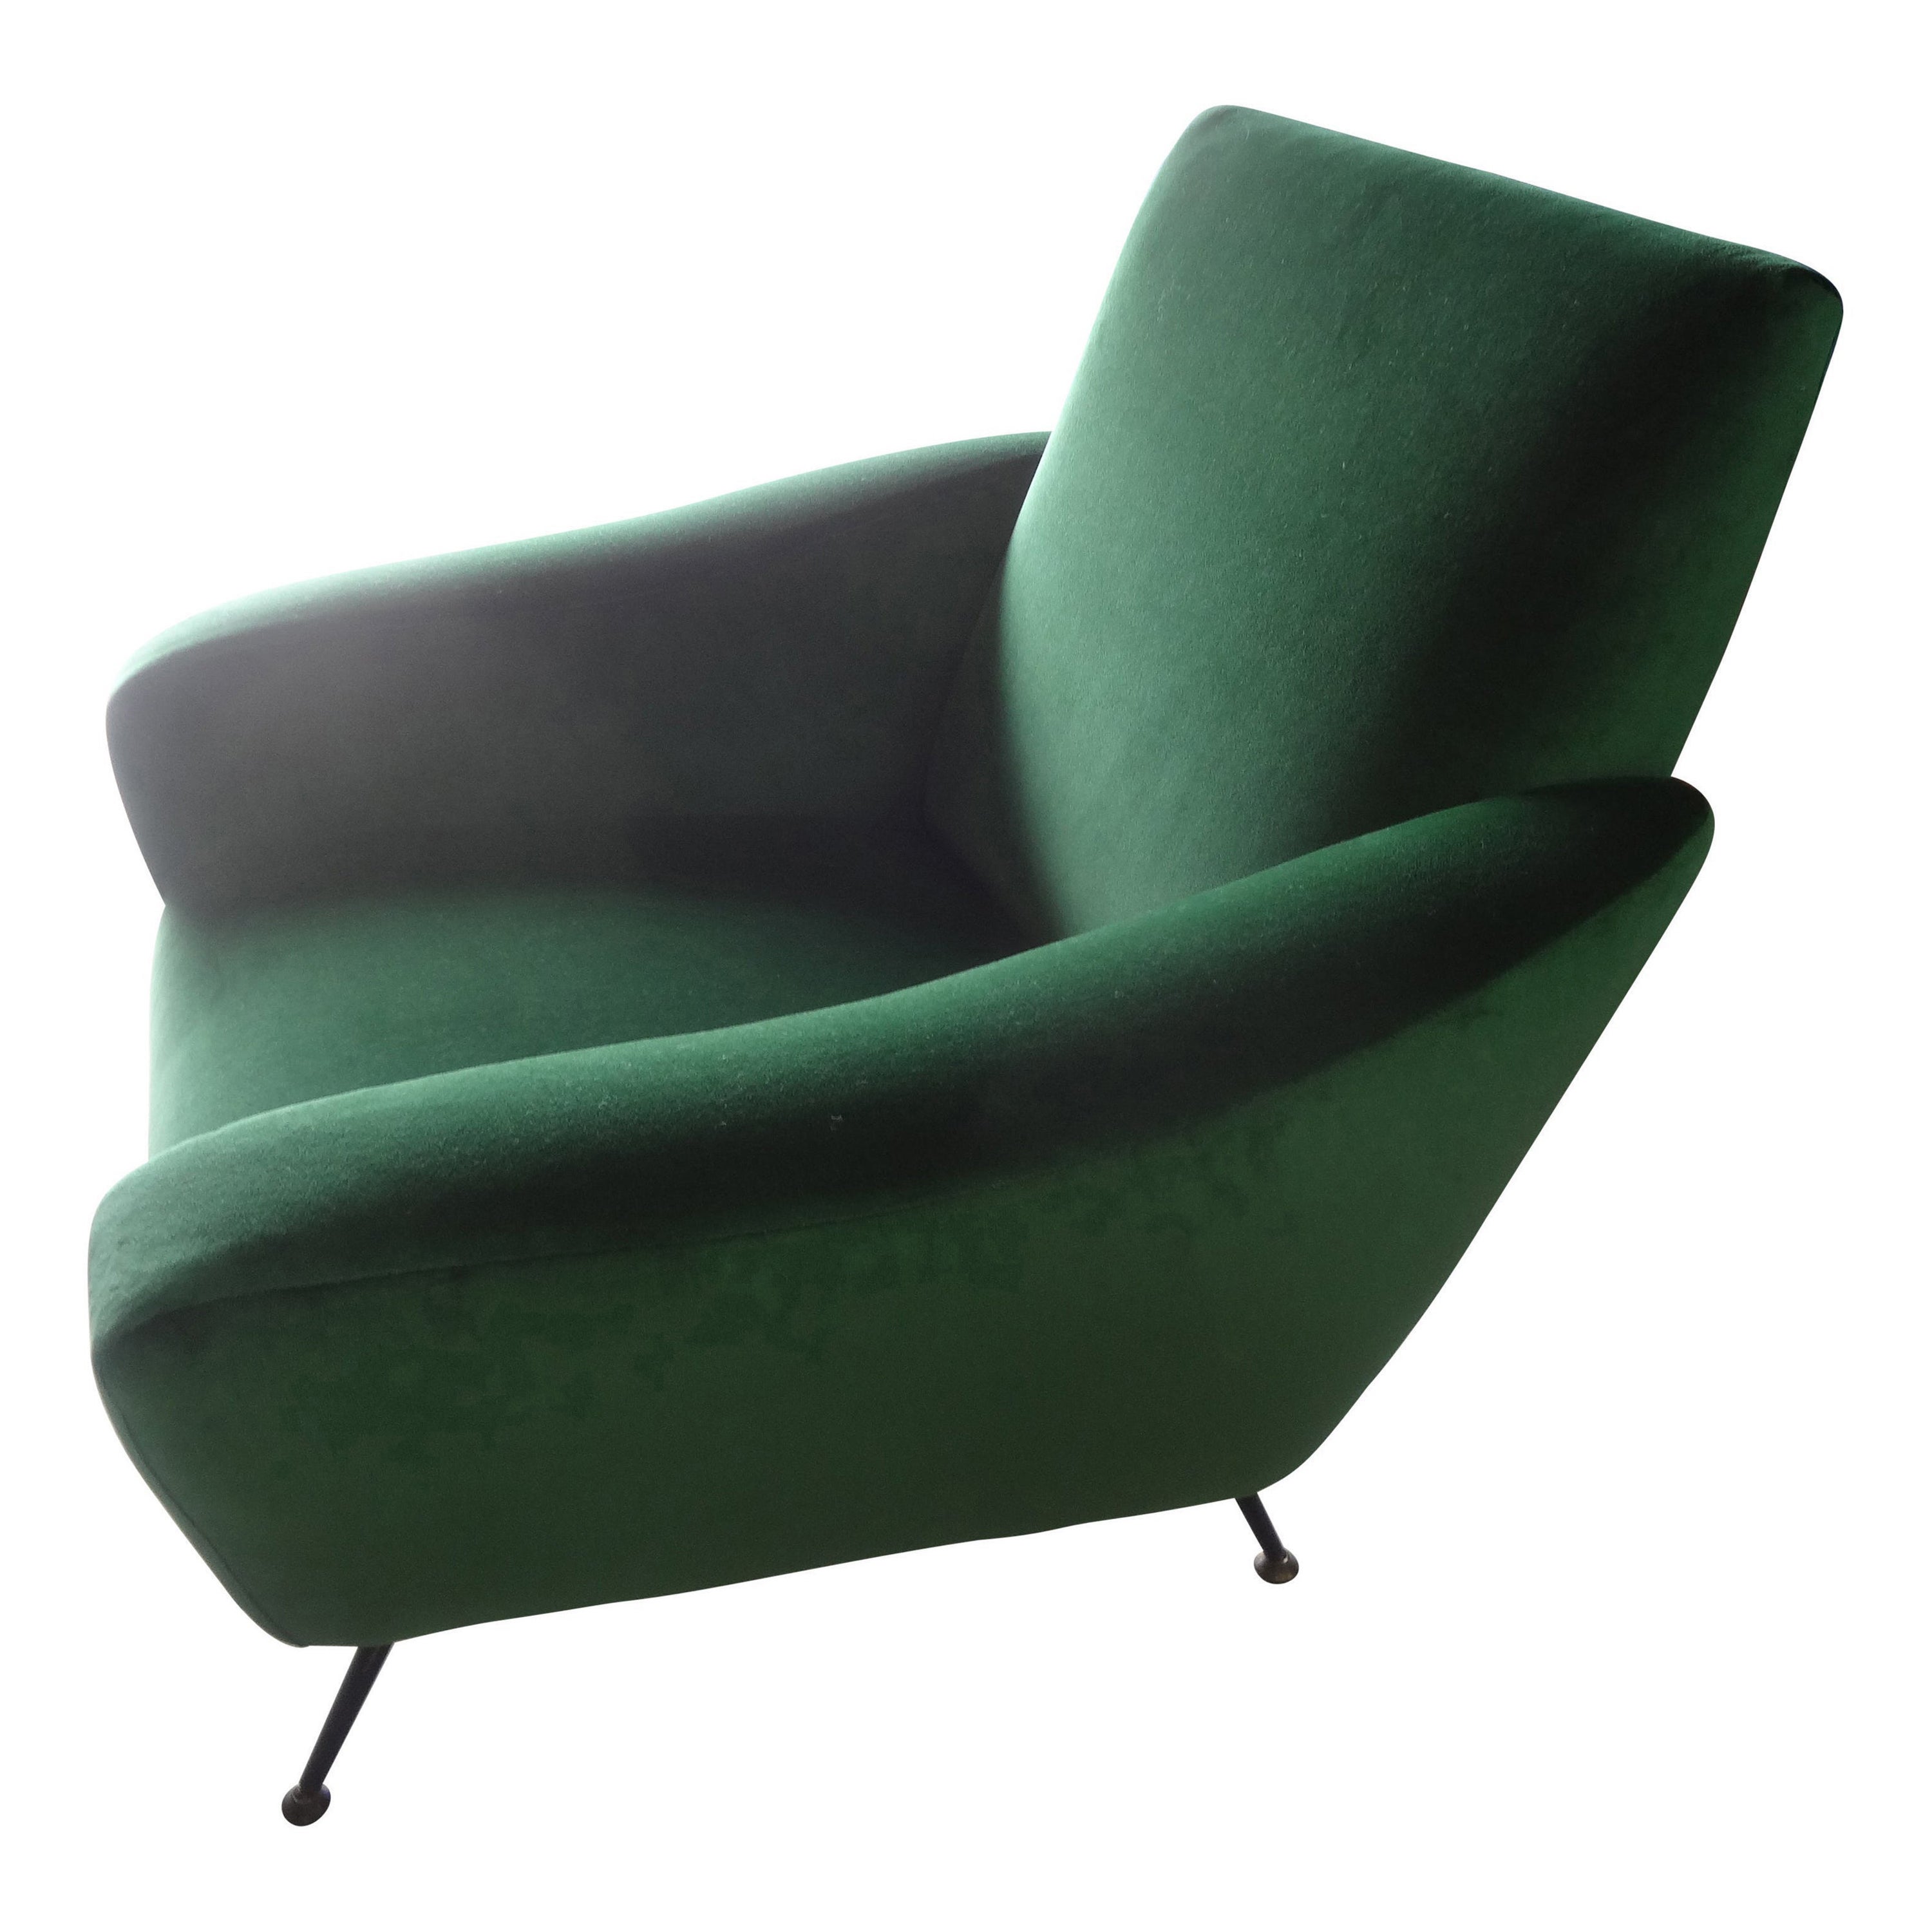 Italian Sculptural Lounge Chair in the Manner of Gio Ponti